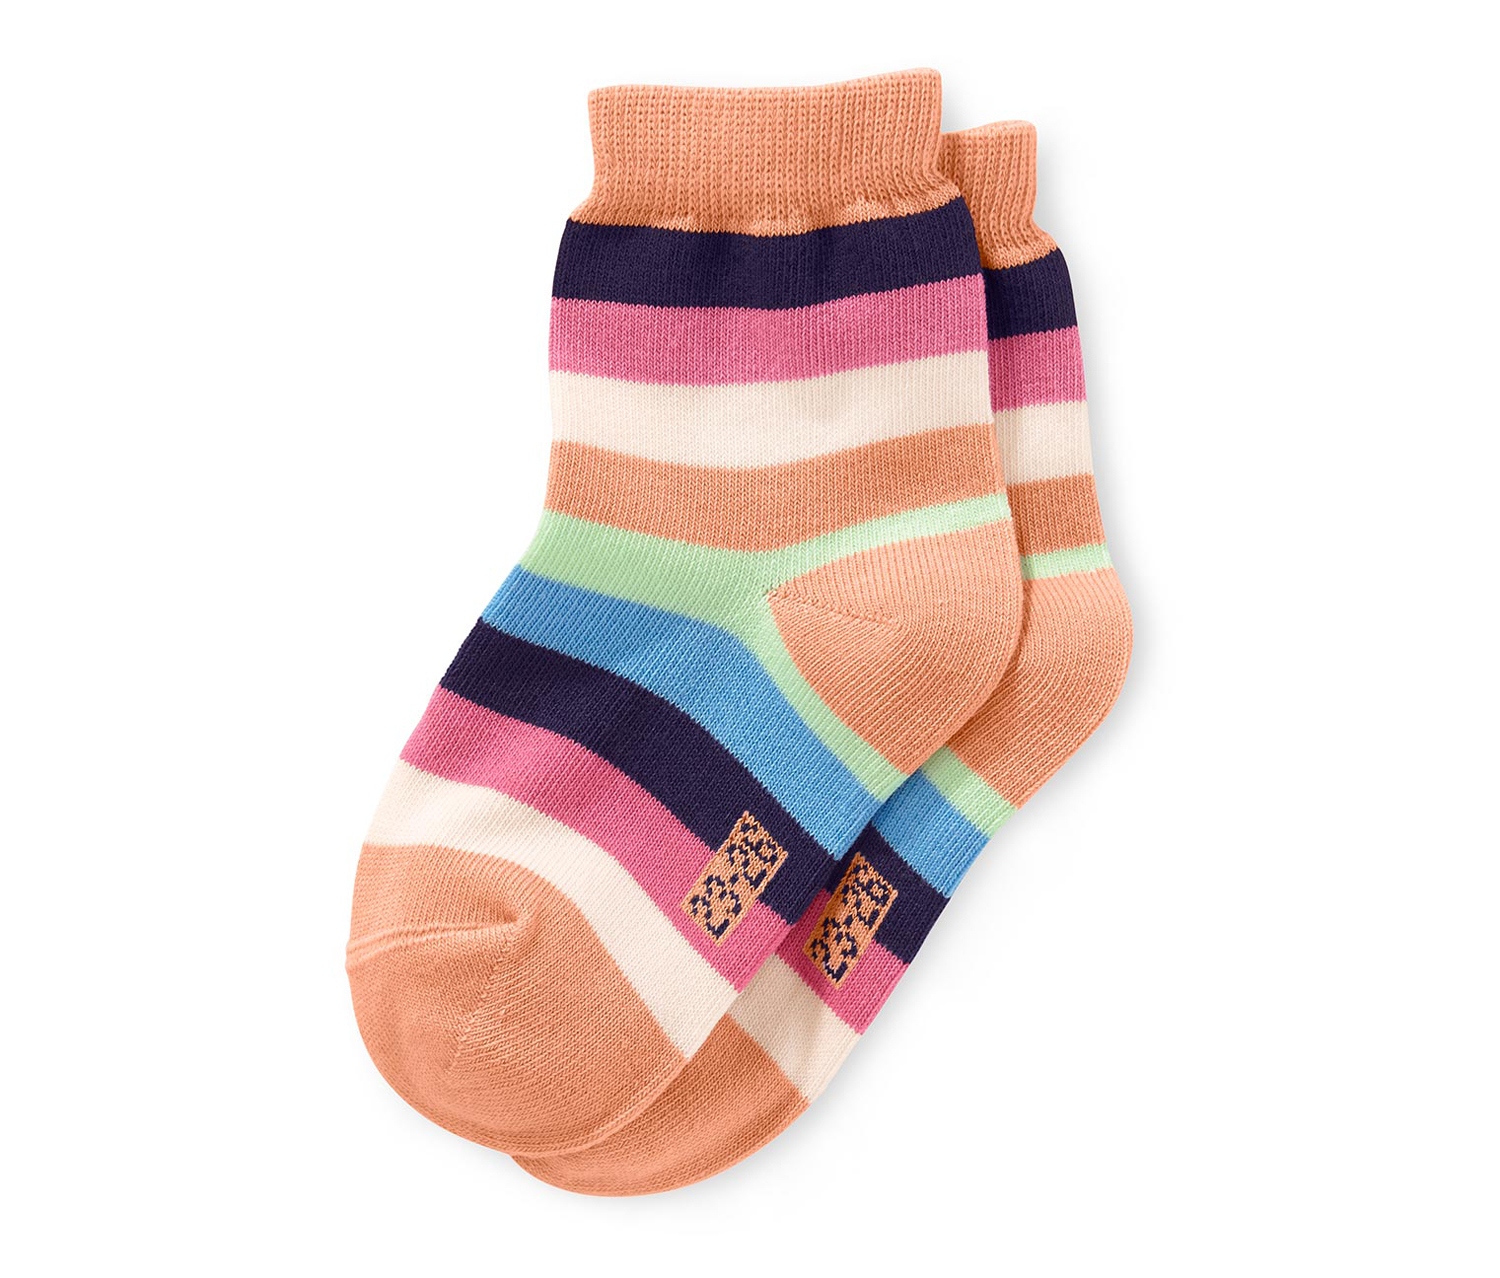 Multicolor Socks Wallpapers High Quality | Download Free